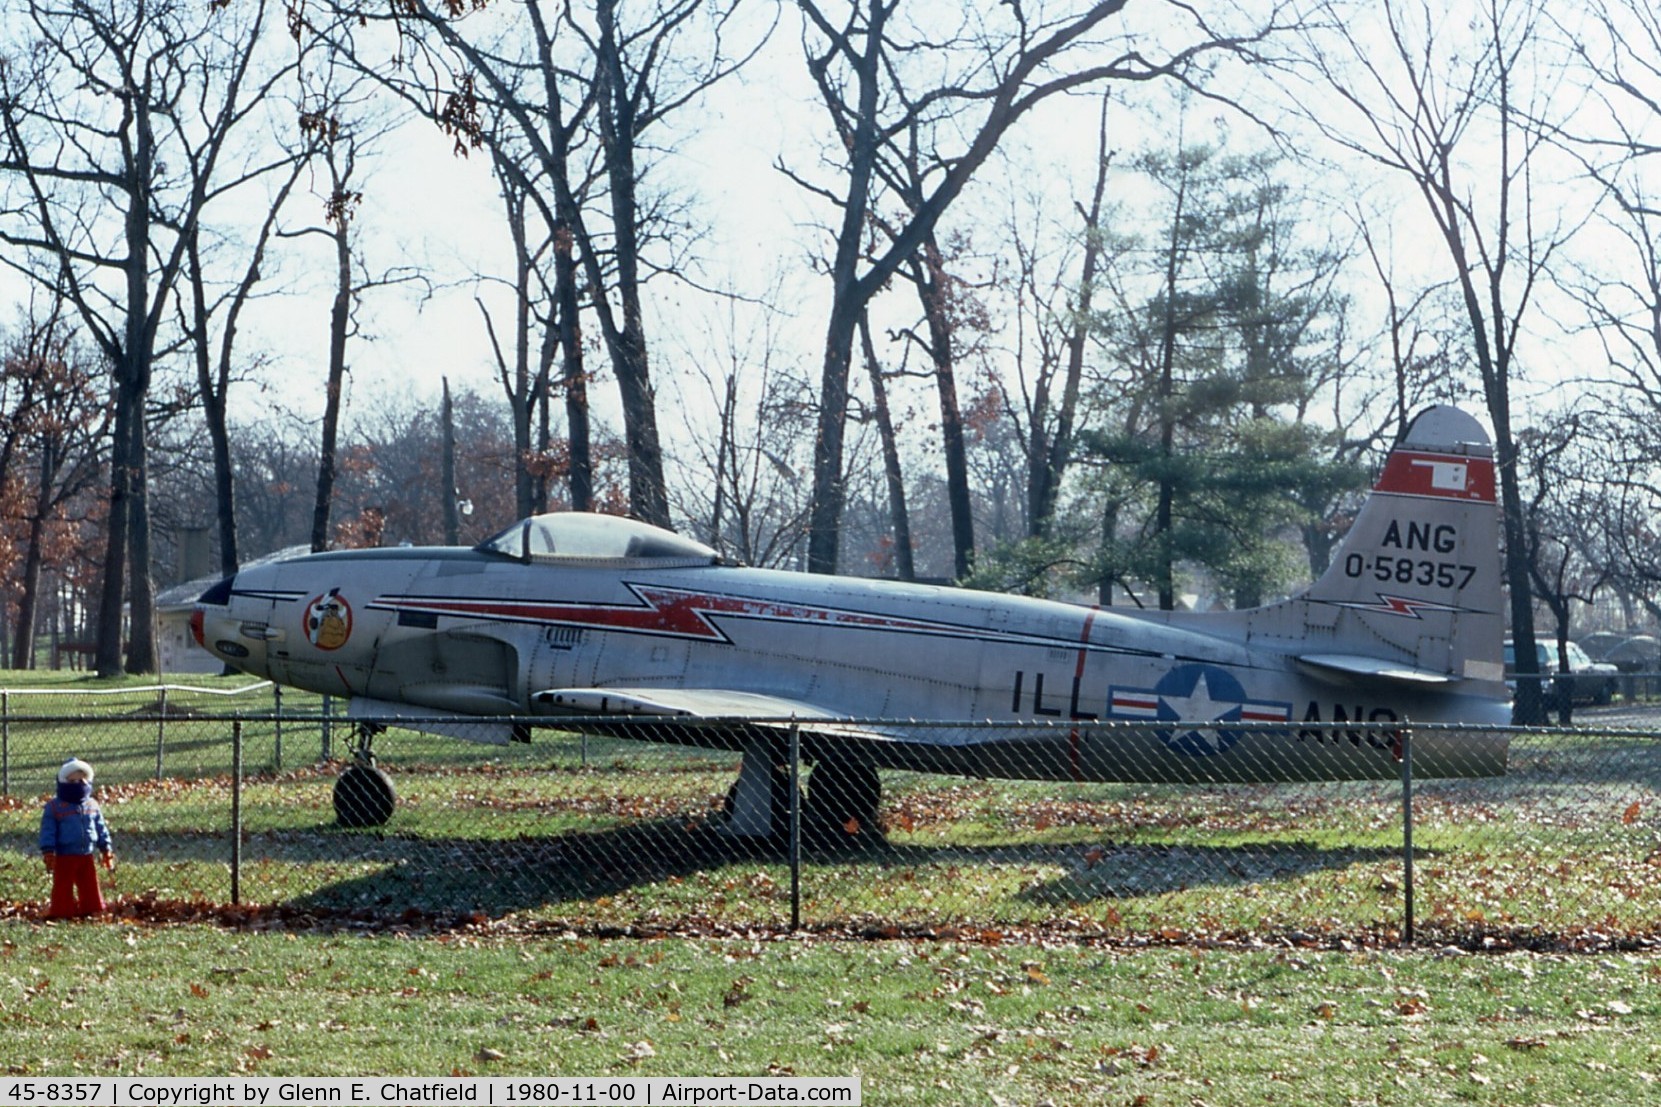 45-8357, 1945 Lockheed F-80C-11-LO Shooting Star C/N 080-1571, At Phillips Park in Aurora, IL.  Later replaced by an F-105.  That's my daughter on the left